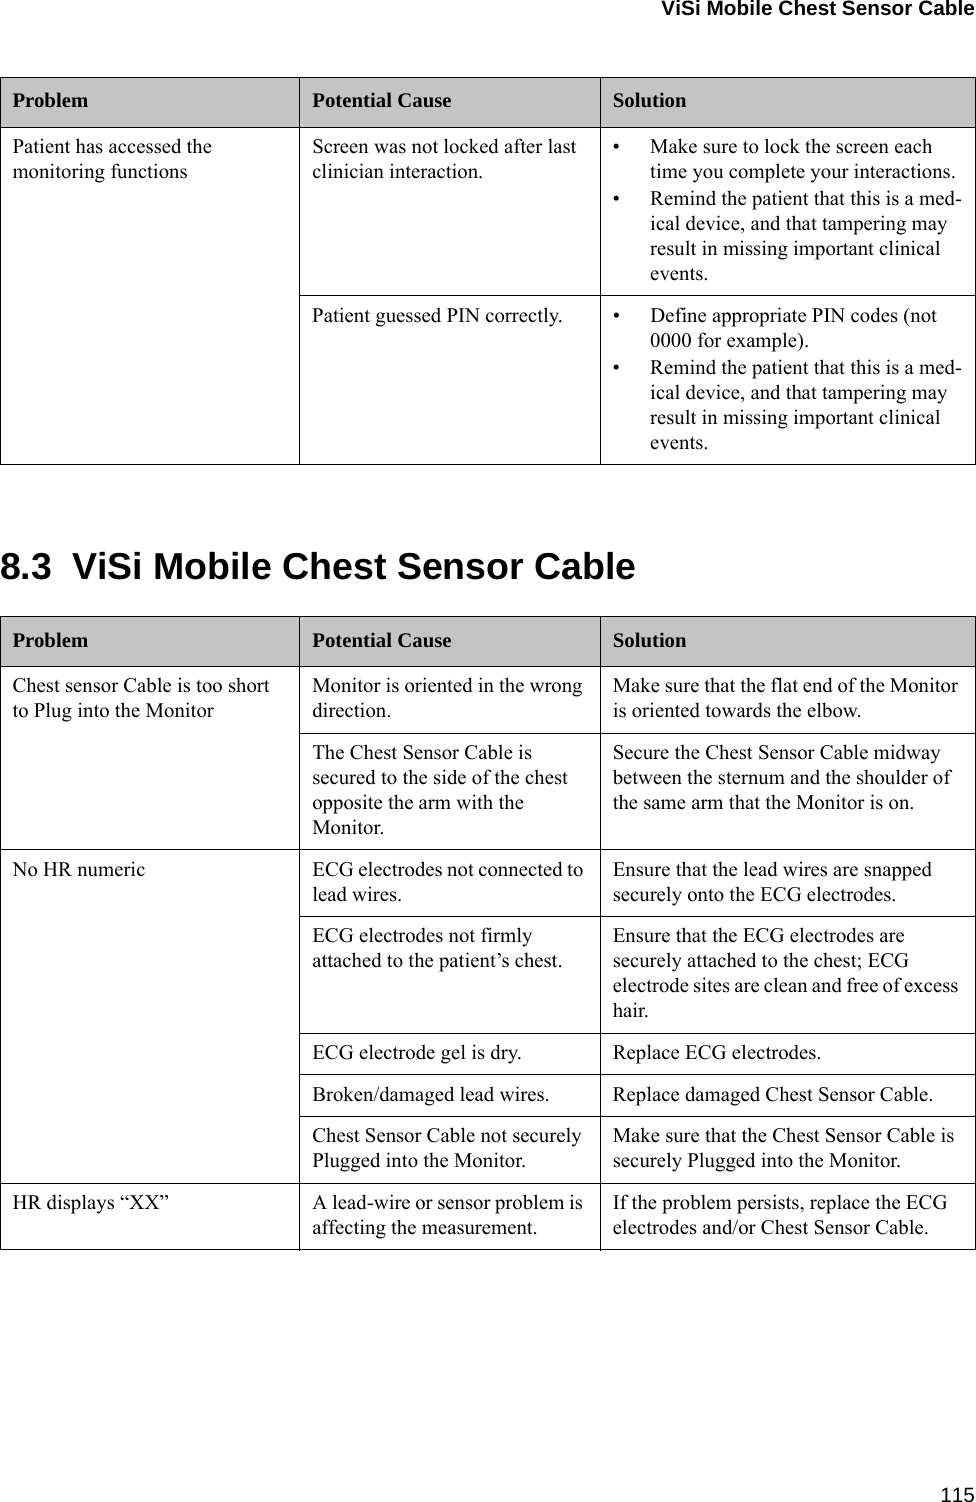 ViSi Mobile Chest Sensor Cable1158.3  ViSi Mobile Chest Sensor CablePatient has accessed the monitoring functionsScreen was not locked after last clinician interaction.• Make sure to lock the screen each time you complete your interactions.• Remind the patient that this is a med-ical device, and that tampering may result in missing important clinical events.Patient guessed PIN correctly. • Define appropriate PIN codes (not 0000 for example).• Remind the patient that this is a med-ical device, and that tampering may result in missing important clinical events.Problem Potential Cause SolutionChest sensor Cable is too short to Plug into the MonitorMonitor is oriented in the wrong direction.Make sure that the flat end of the Monitor is oriented towards the elbow.The Chest Sensor Cable is secured to the side of the chest opposite the arm with the Monitor.Secure the Chest Sensor Cable midway between the sternum and the shoulder of the same arm that the Monitor is on.No HR numeric ECG electrodes not connected to lead wires.Ensure that the lead wires are snapped securely onto the ECG electrodes.ECG electrodes not firmly attached to the patient’s chest.Ensure that the ECG electrodes are securely attached to the chest; ECG electrode sites are clean and free of excess hair.ECG electrode gel is dry. Replace ECG electrodes.Broken/damaged lead wires. Replace damaged Chest Sensor Cable.Chest Sensor Cable not securely Plugged into the Monitor.Make sure that the Chest Sensor Cable is securely Plugged into the Monitor.HR displays “XX” A lead-wire or sensor problem is affecting the measurement.If the problem persists, replace the ECG electrodes and/or Chest Sensor Cable.Problem Potential Cause Solution